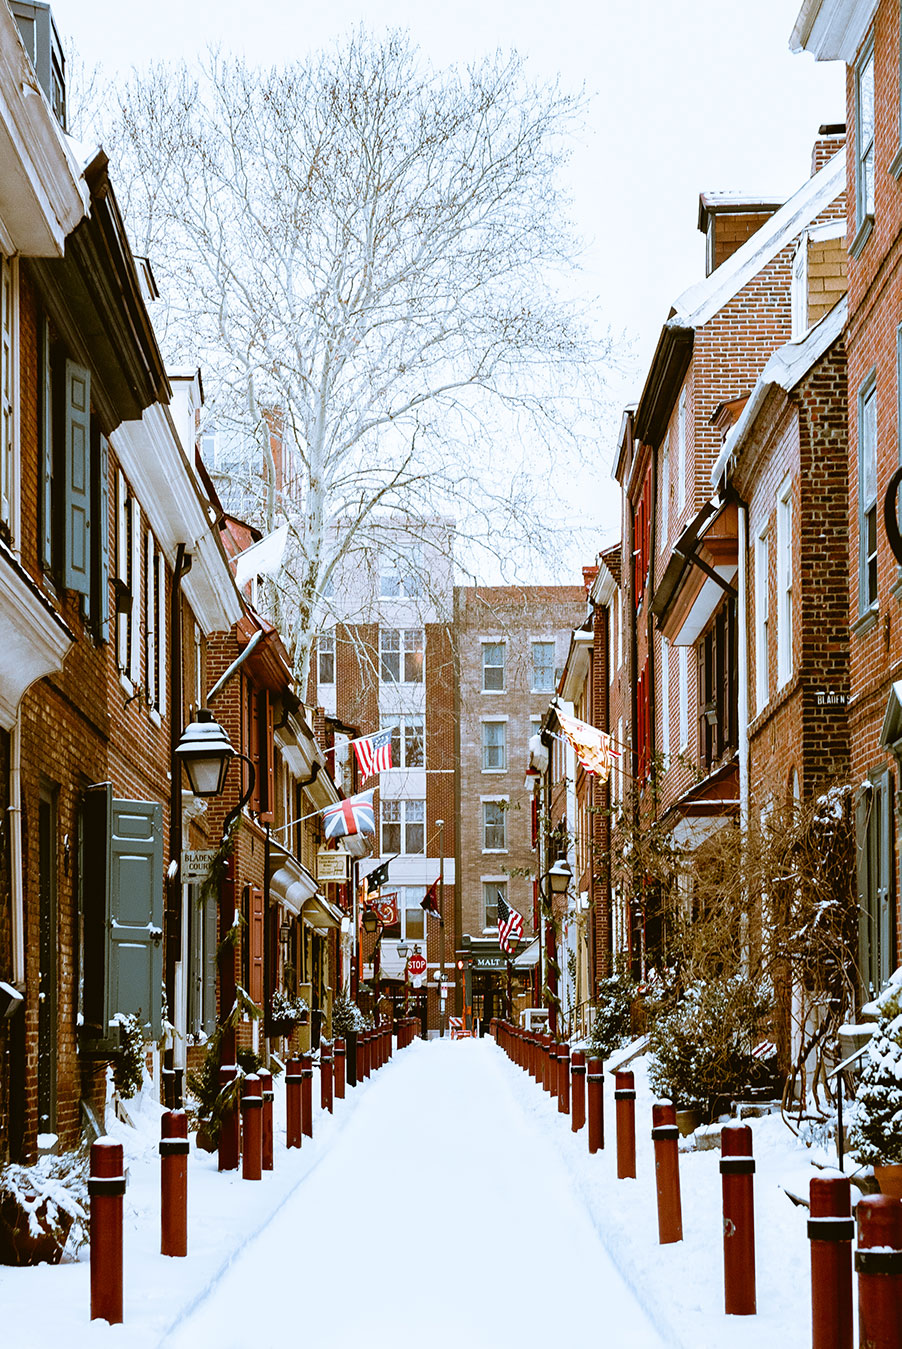 Snow on the ground along Elfreth's Alley - with homes dating back to the 18th-century